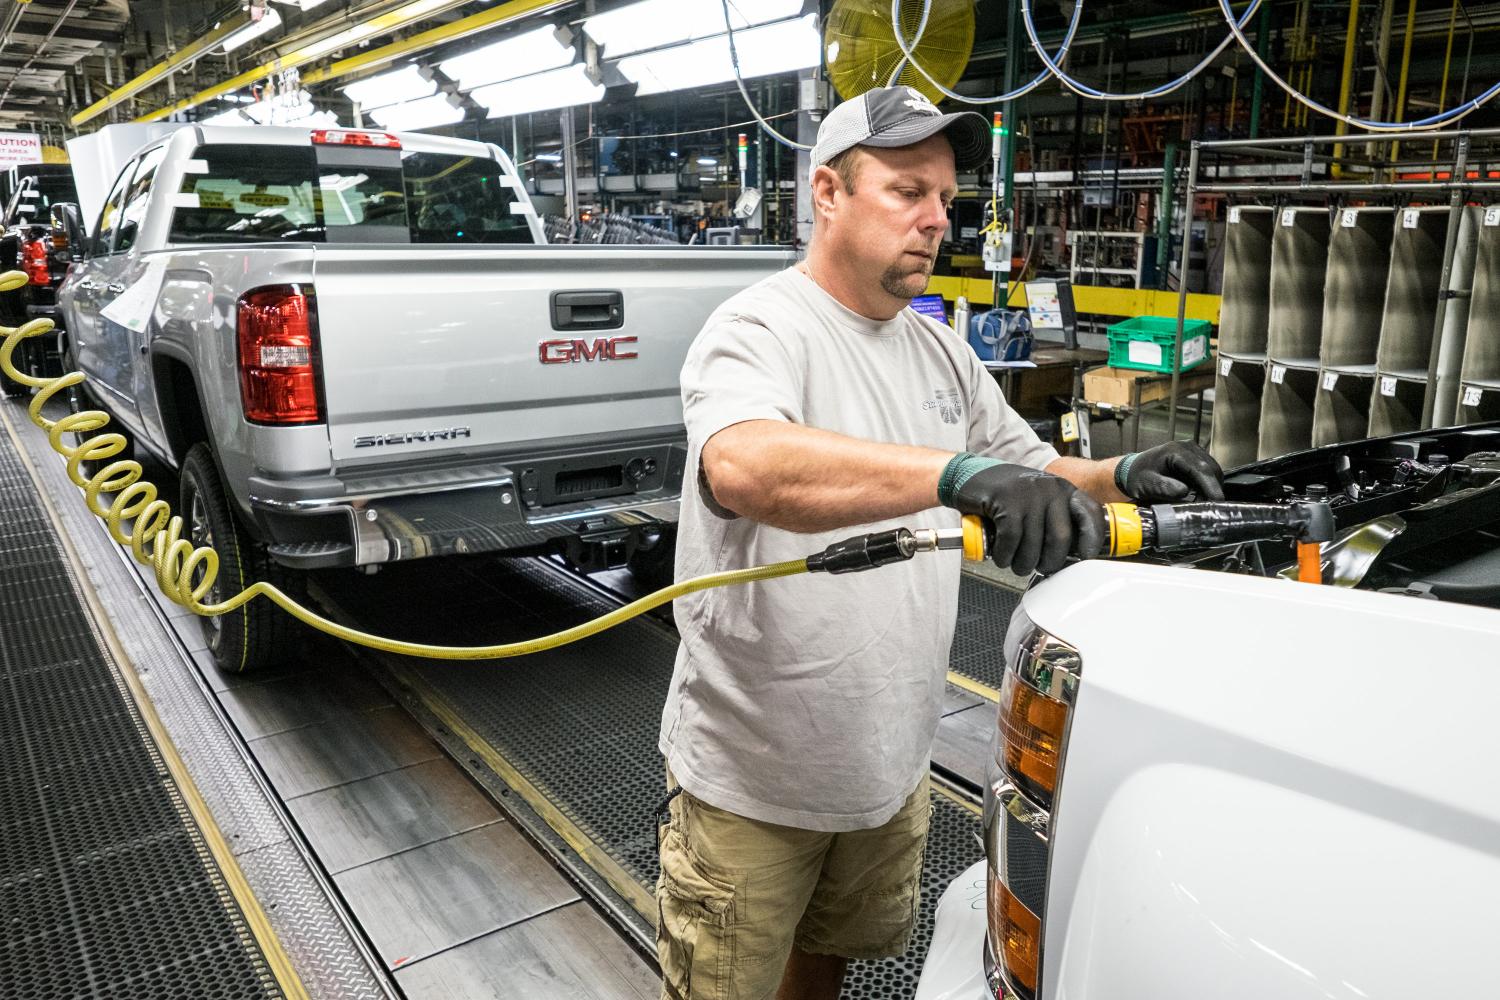 More information about "Great News For GM's Workers"